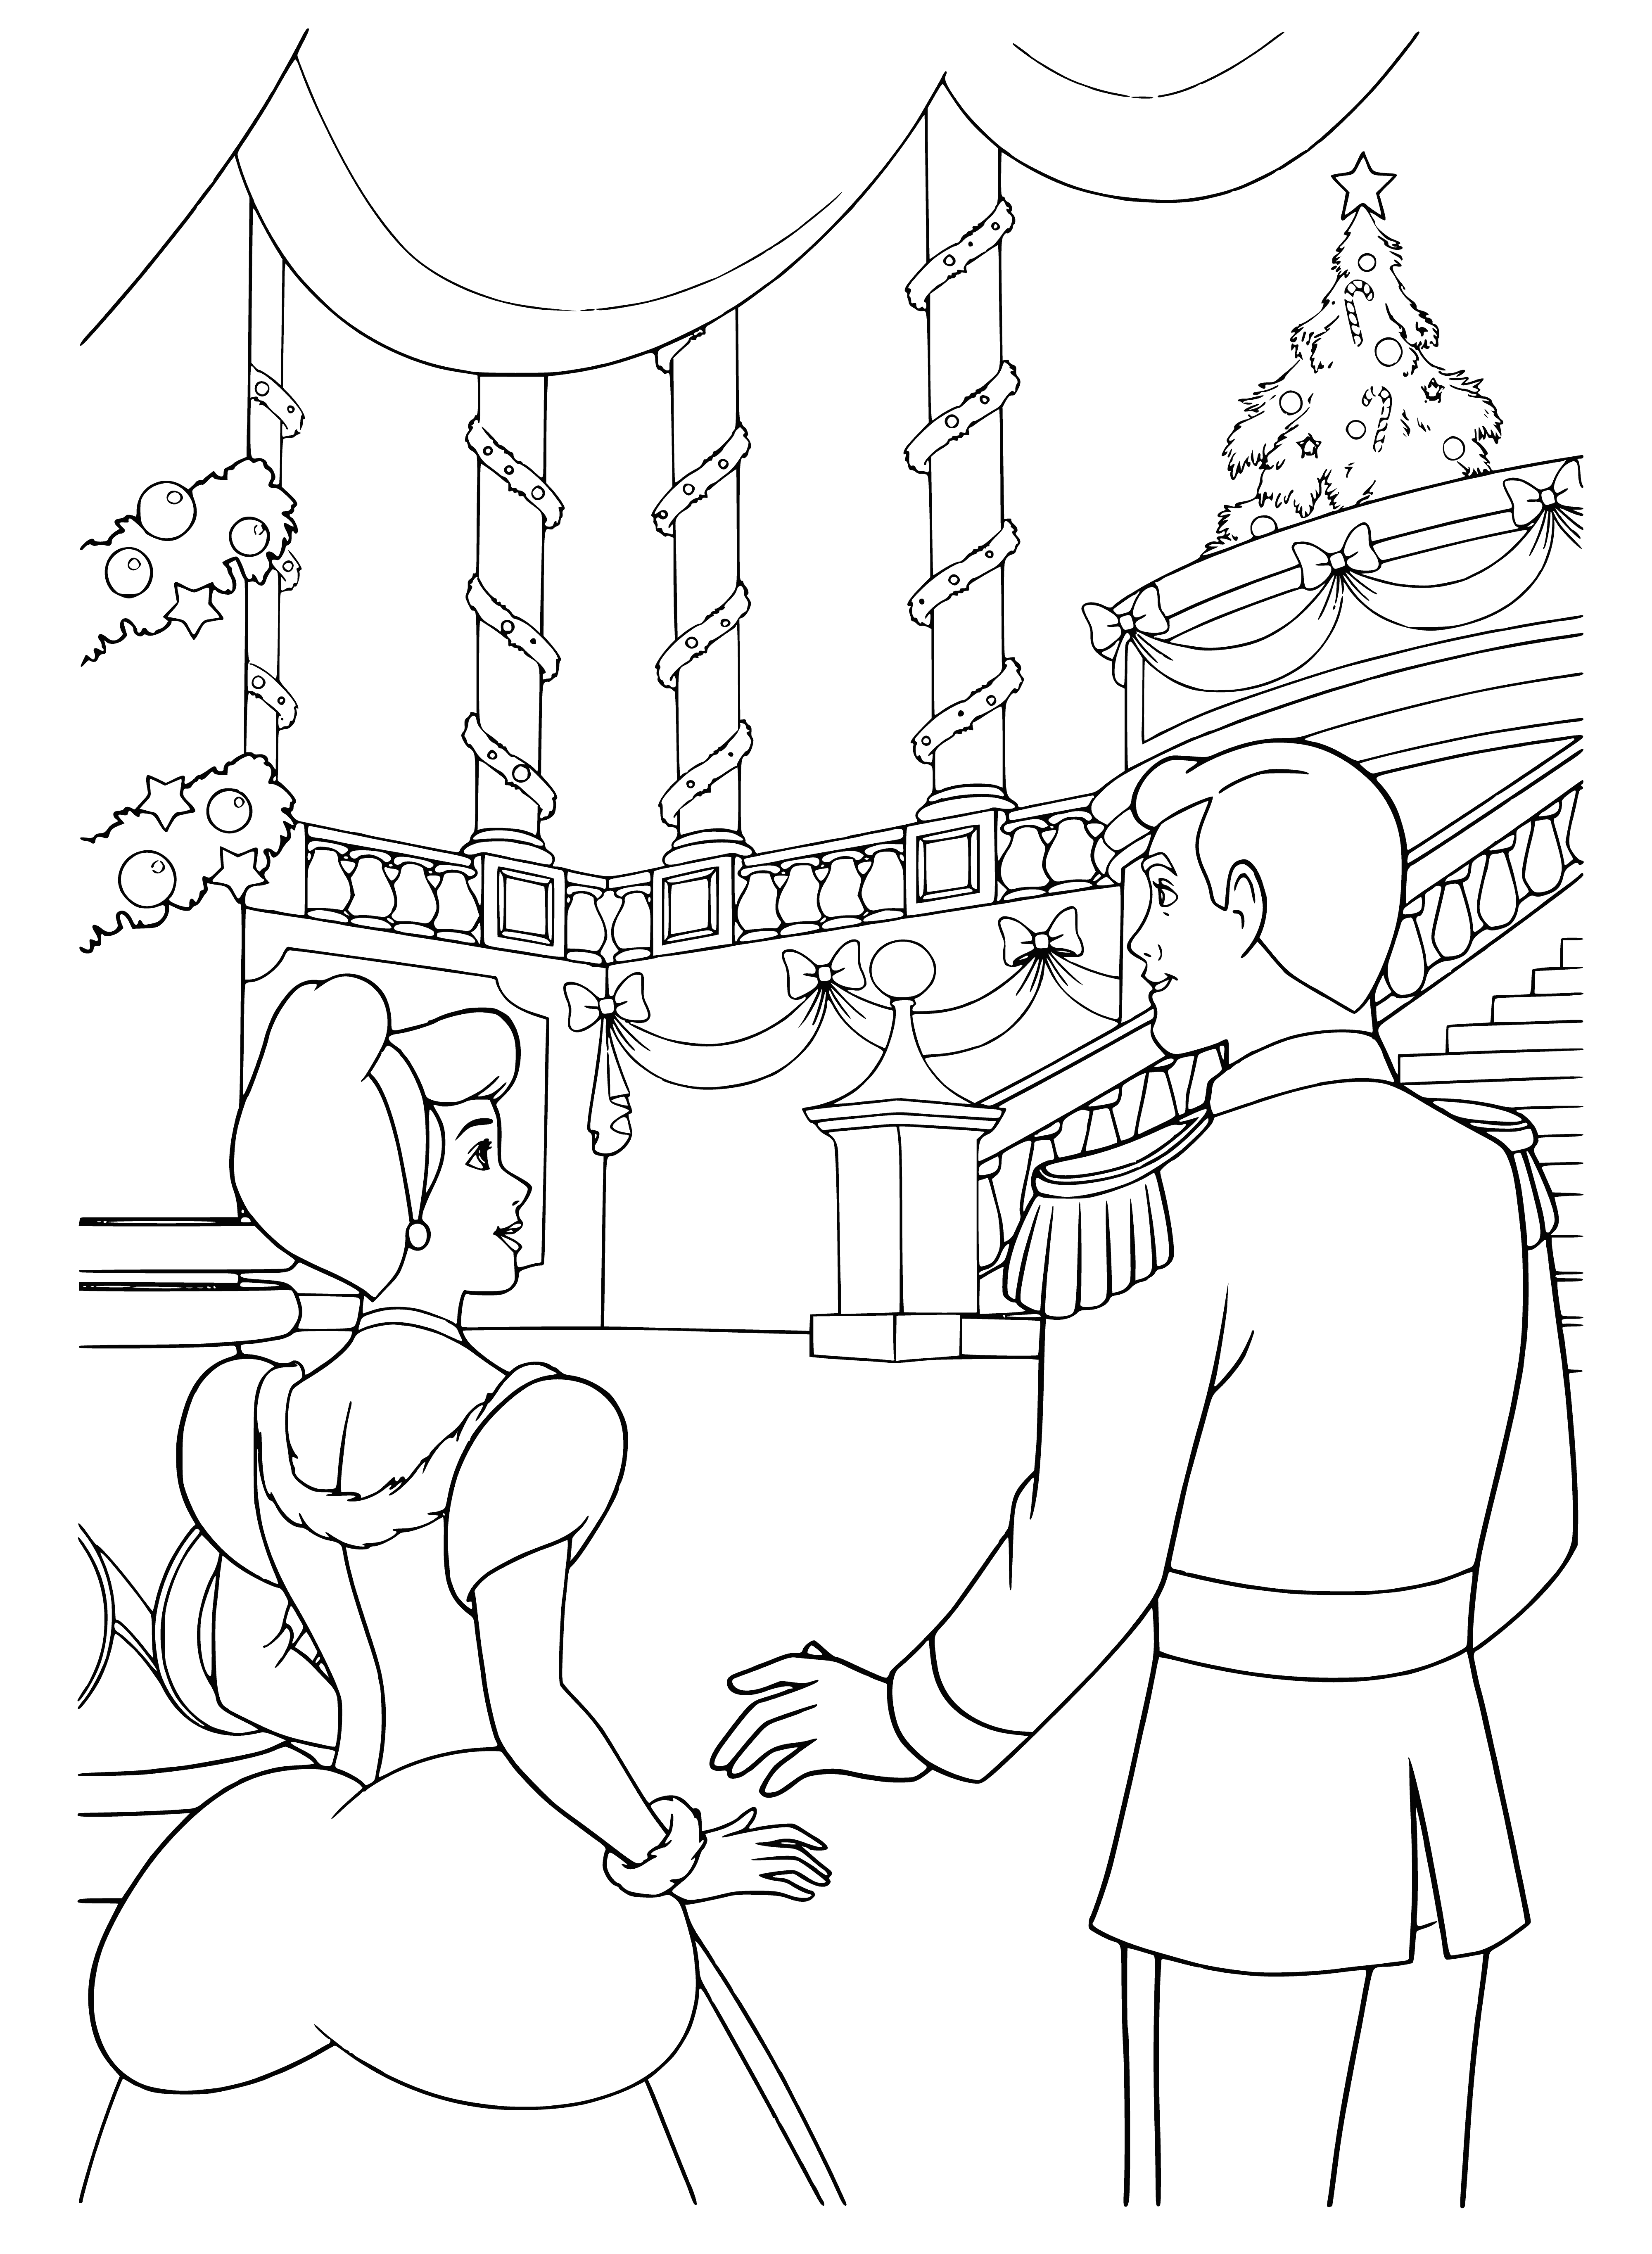 coloring page: Disney princesses celebrating the New Year in palace; decorated with banners, streamers, clock, cake & balloons; they are all smiles & enjoying themselves.